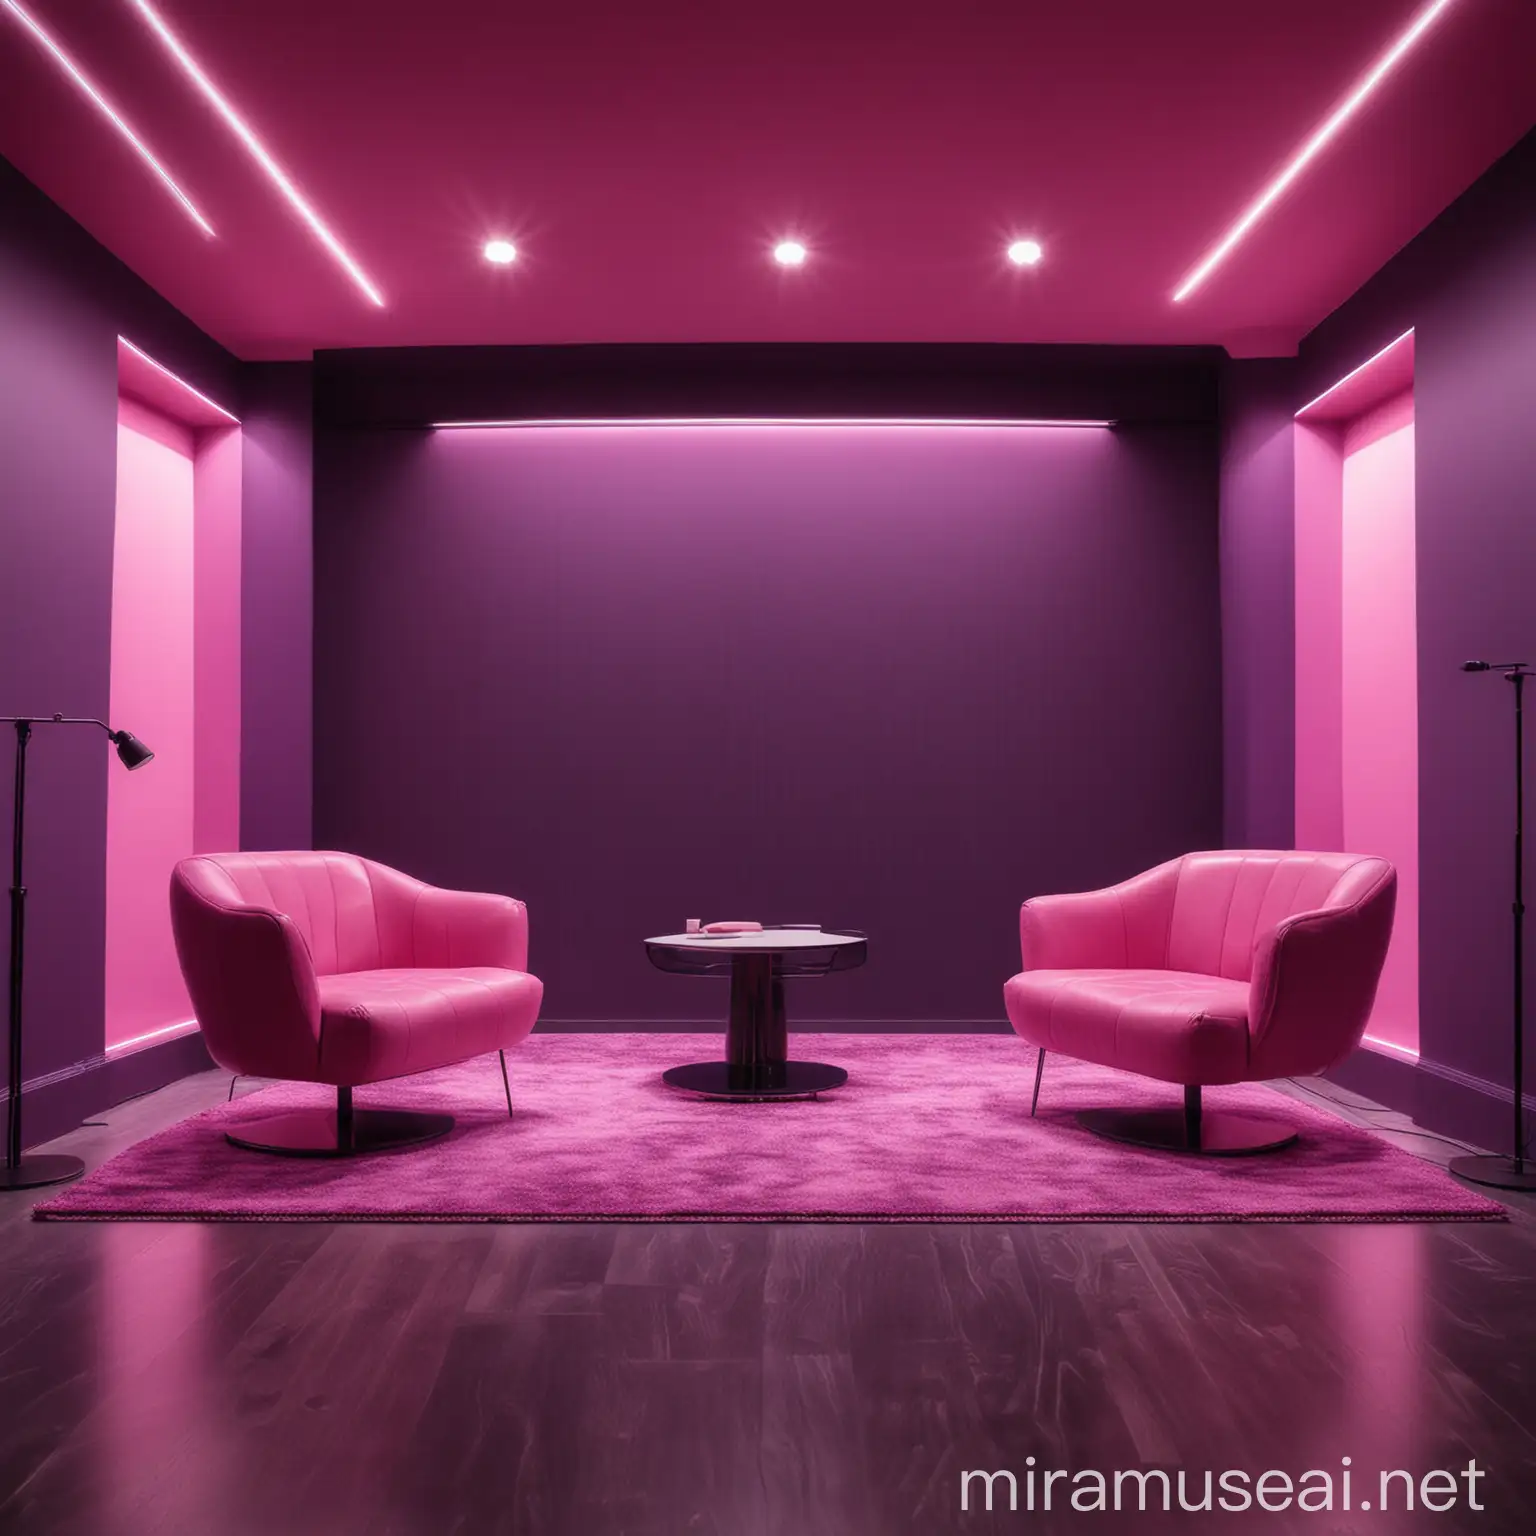 Modern Empty Podcast Studio Room. Sleek Furniture with Vibrant Pink And Purple Glow. Intimate Discussion Setting